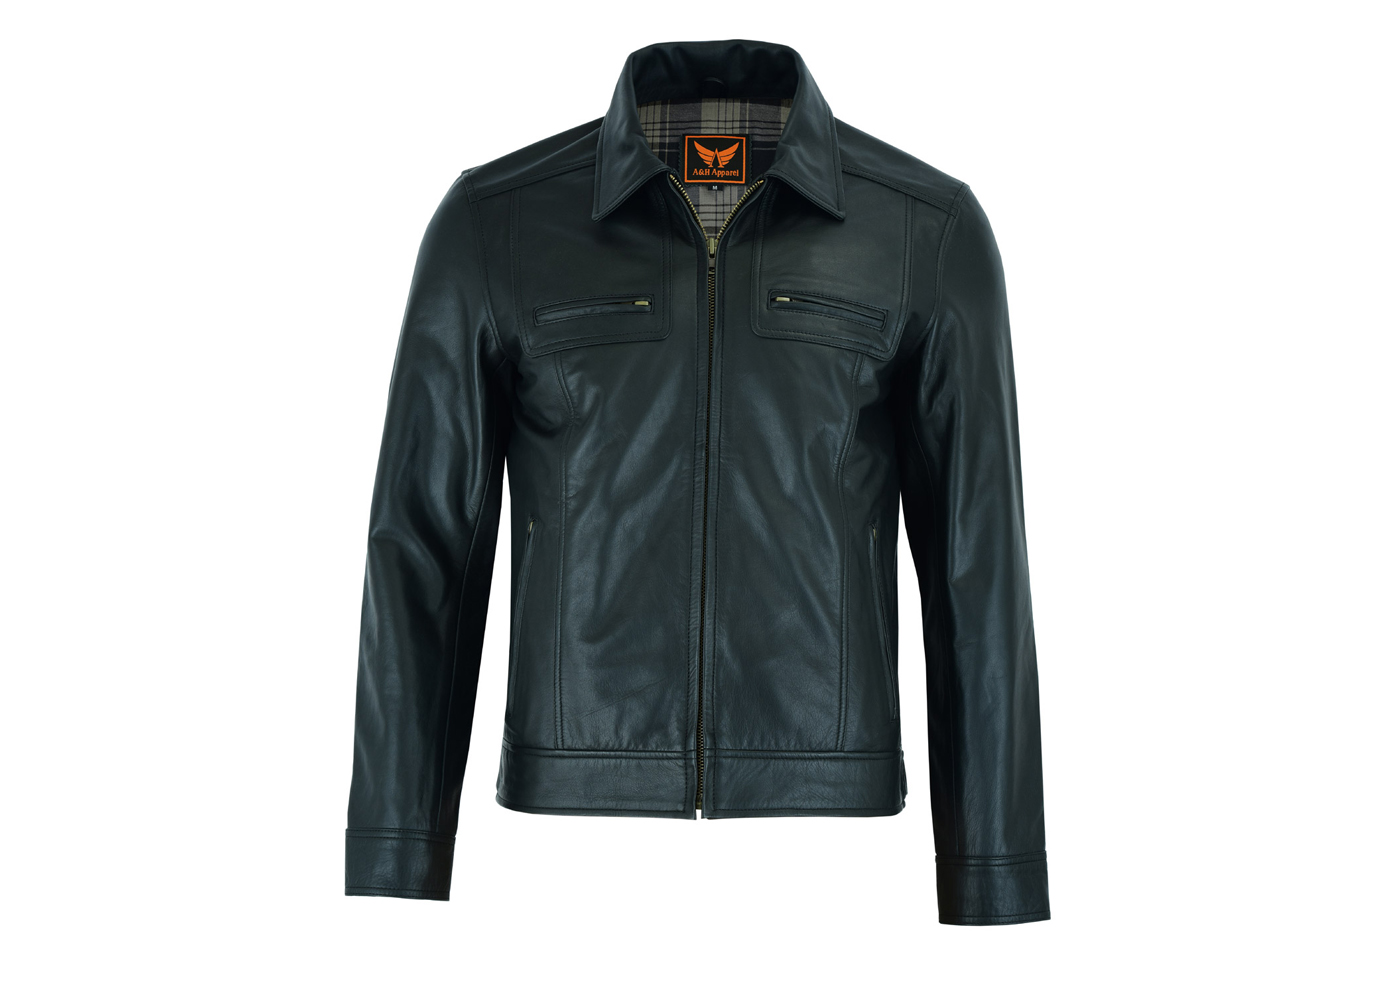 Vance Leathers VL551CBr Mens Vincent Brown Waxed Premium Cowhide Motorcycle  Leather Jacket With Removeable Hoodie in Leather Jackets & Clothing -  $179.95